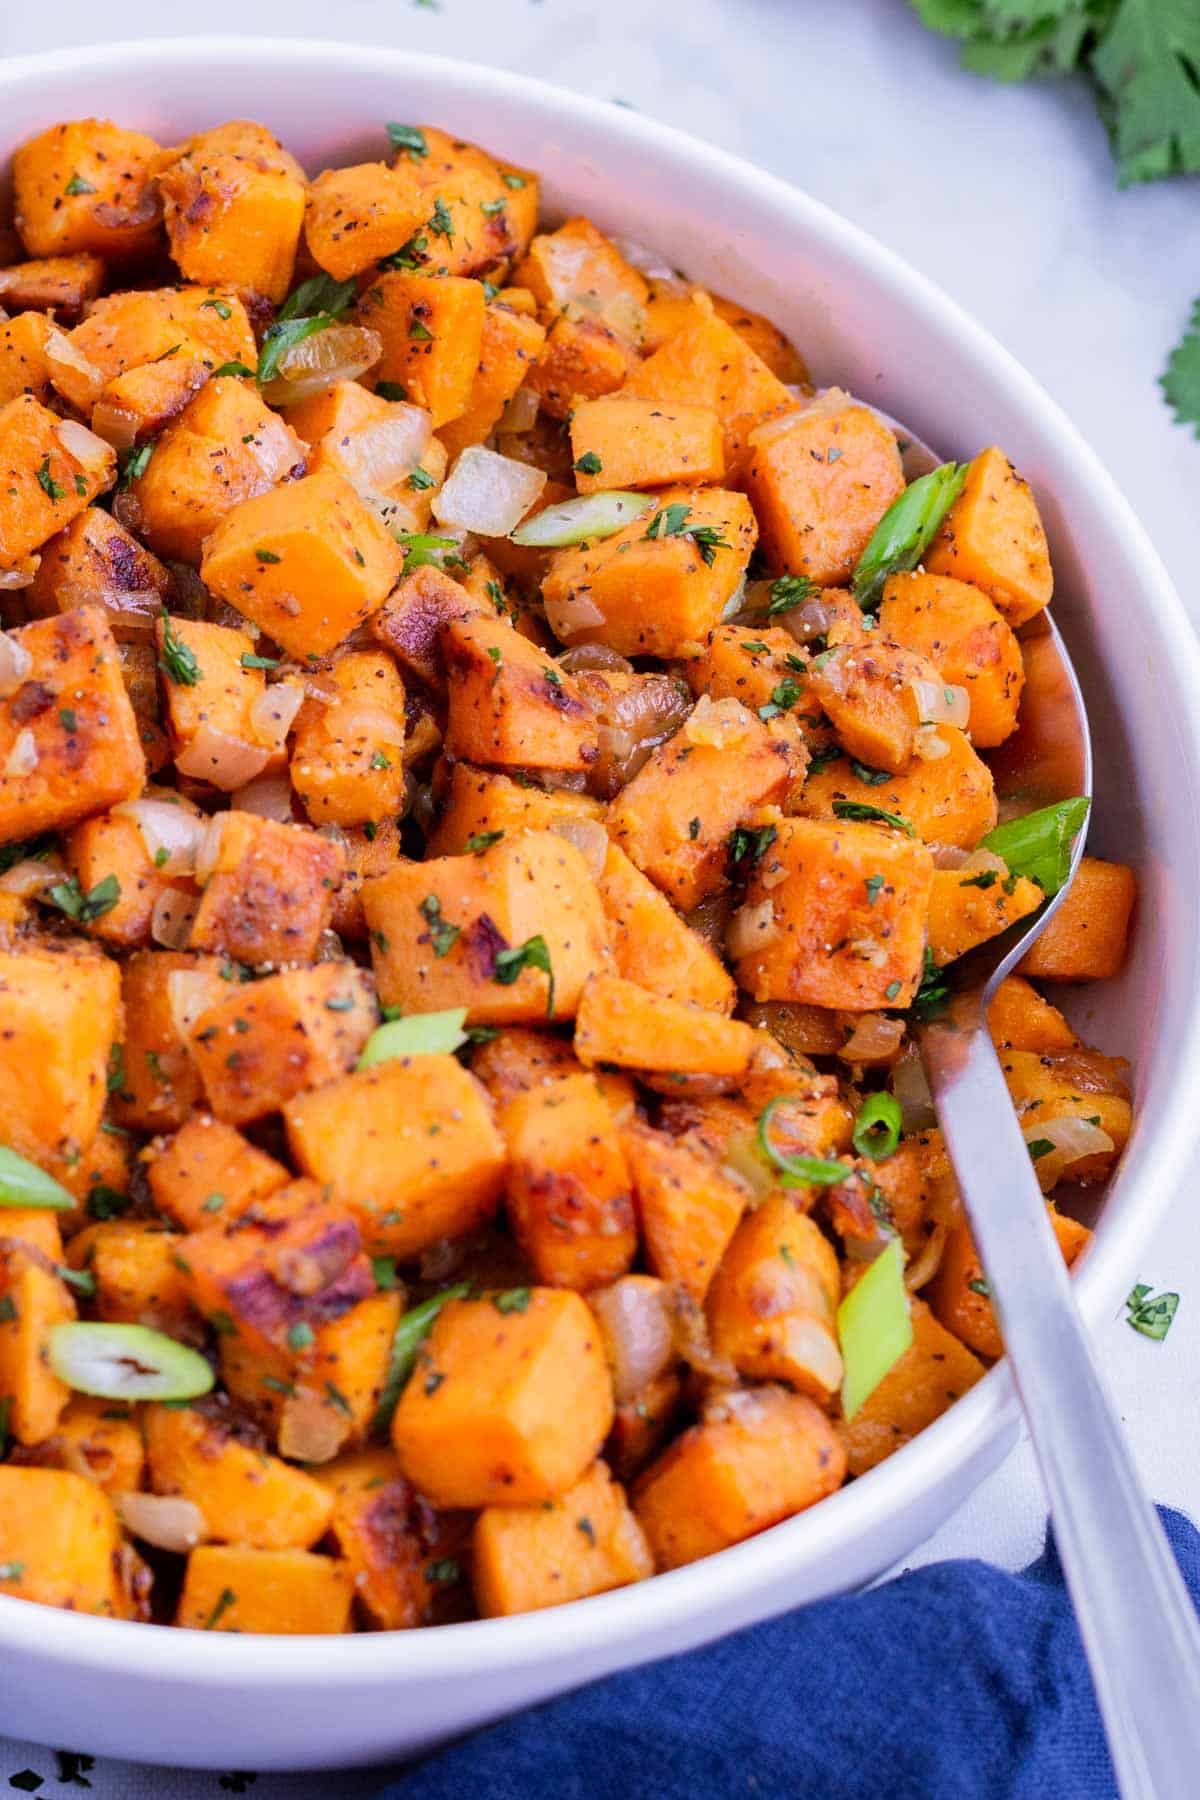 A metal spoons digs into a white bowl full of sauteed sweet potatoes.